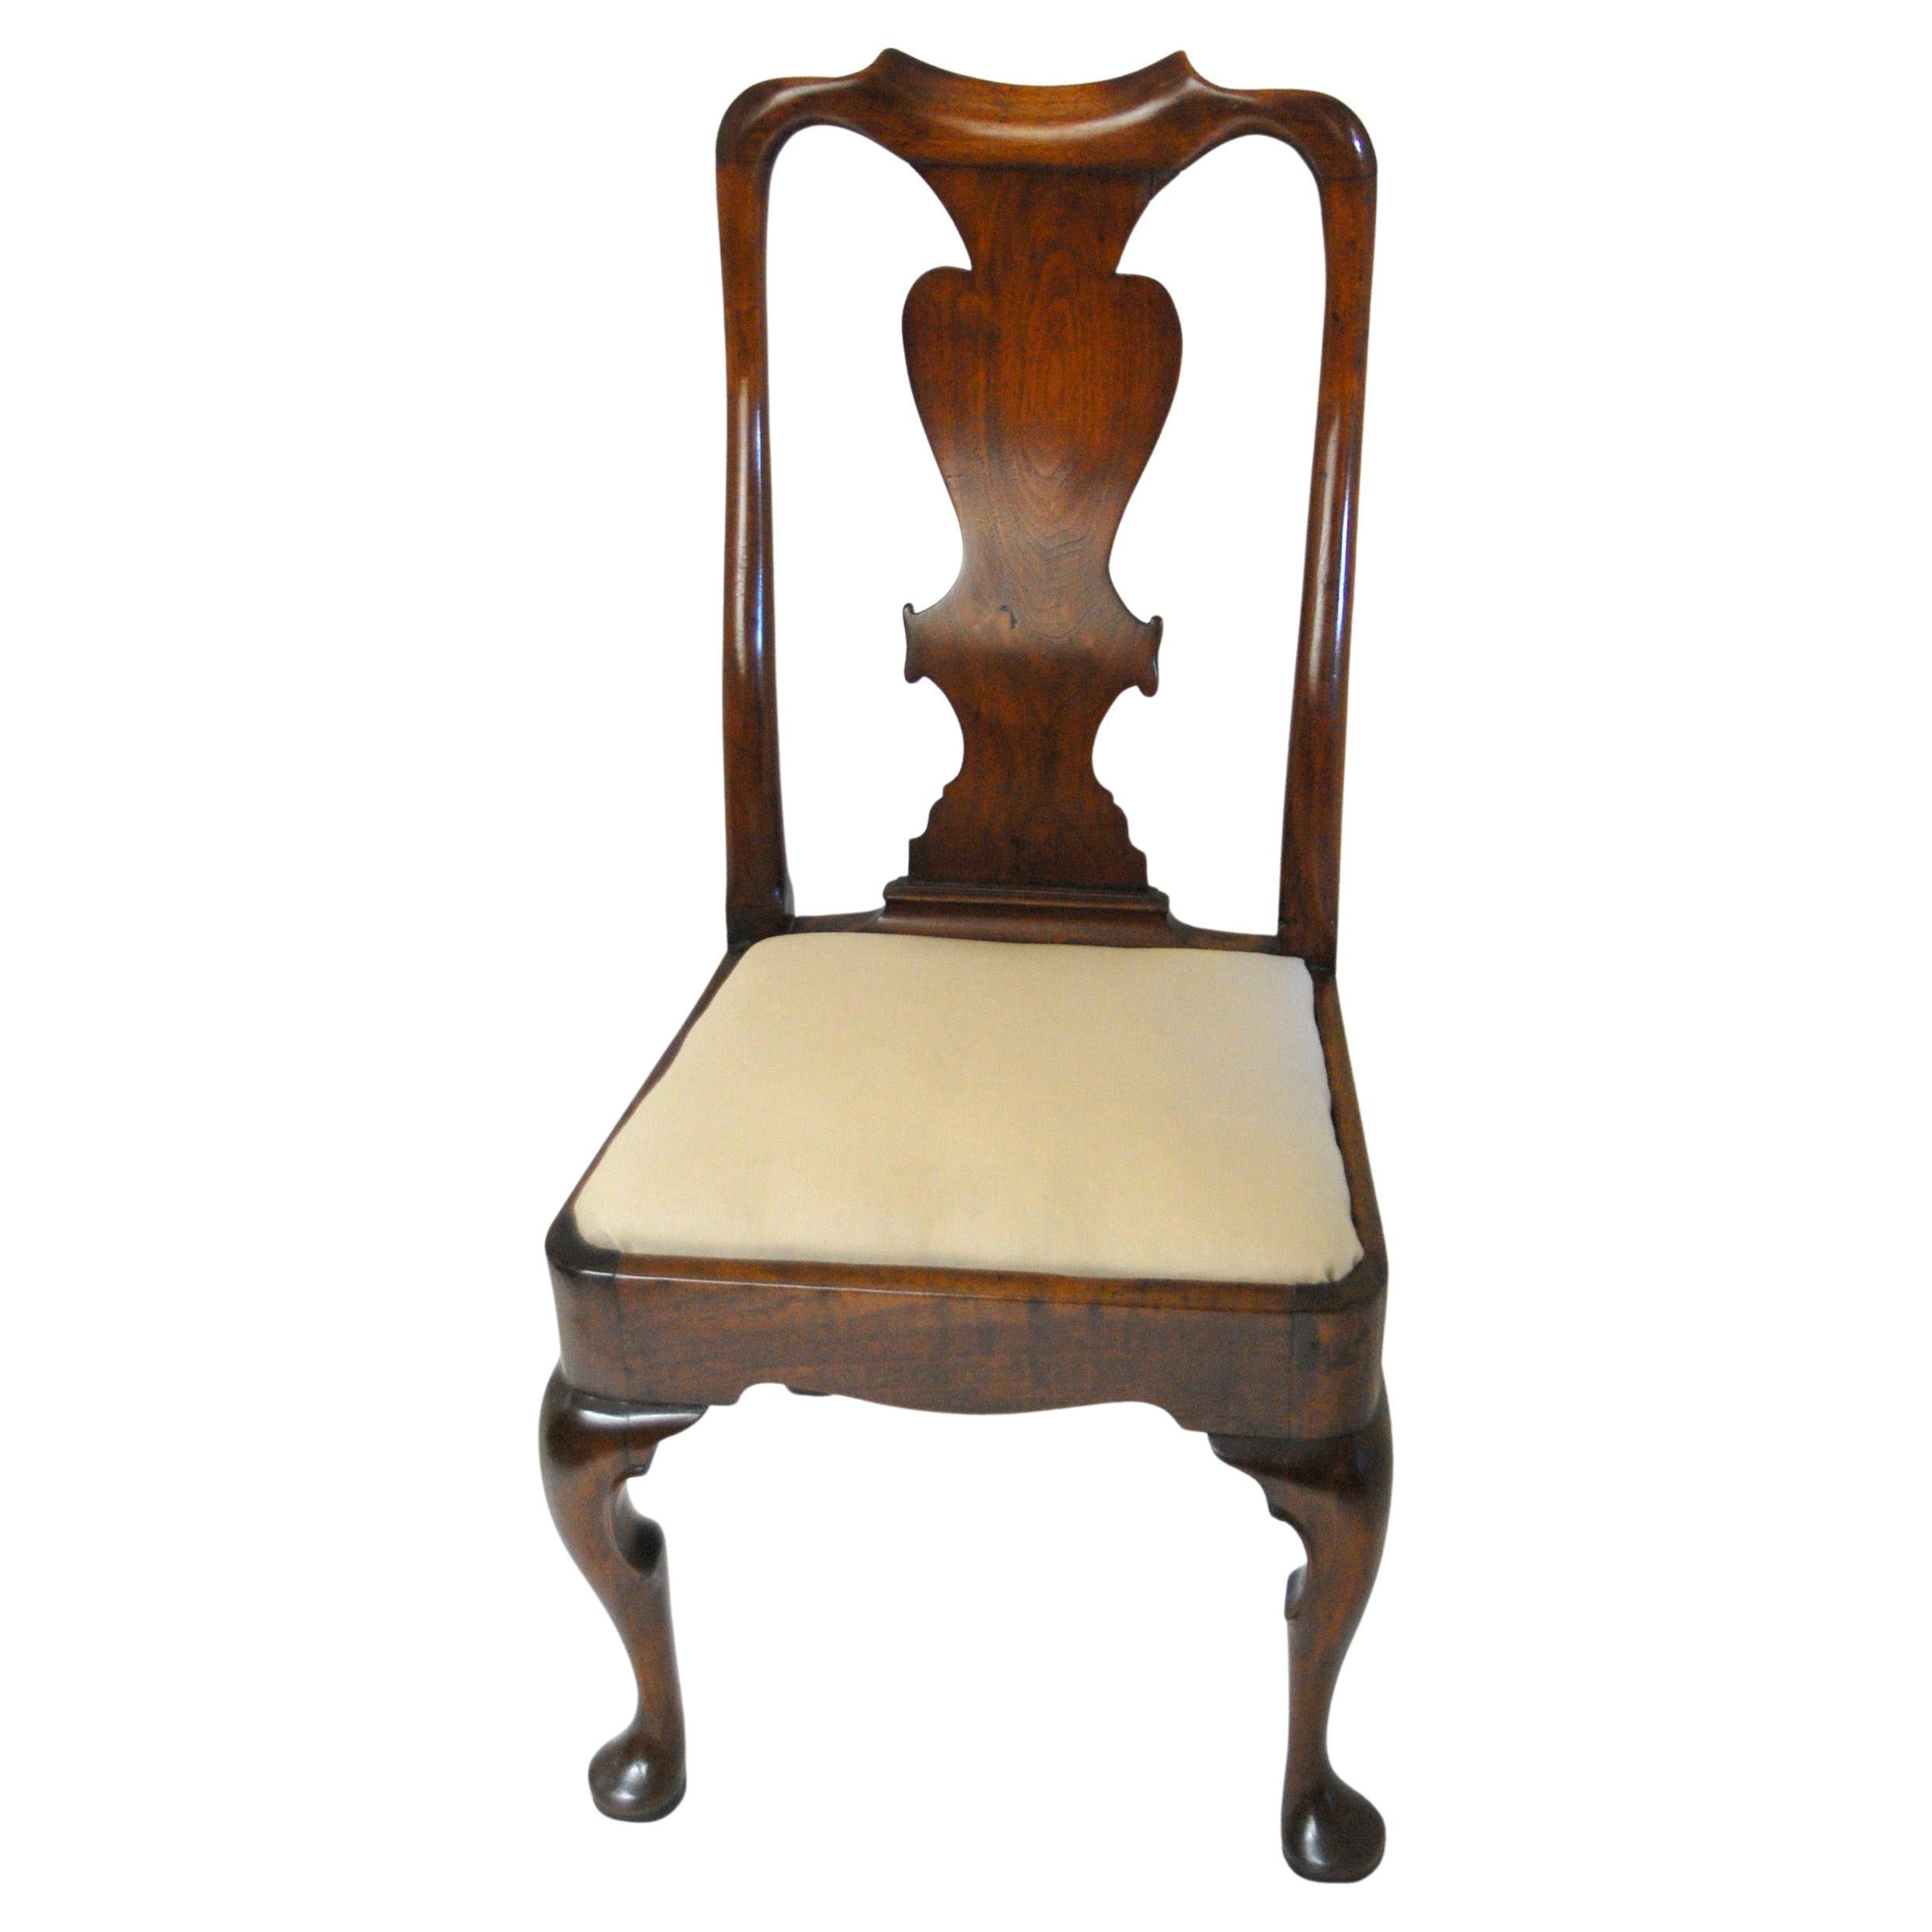 English Early 18th Century Queen Anne Walnut Side Chair with Cabriole Legs